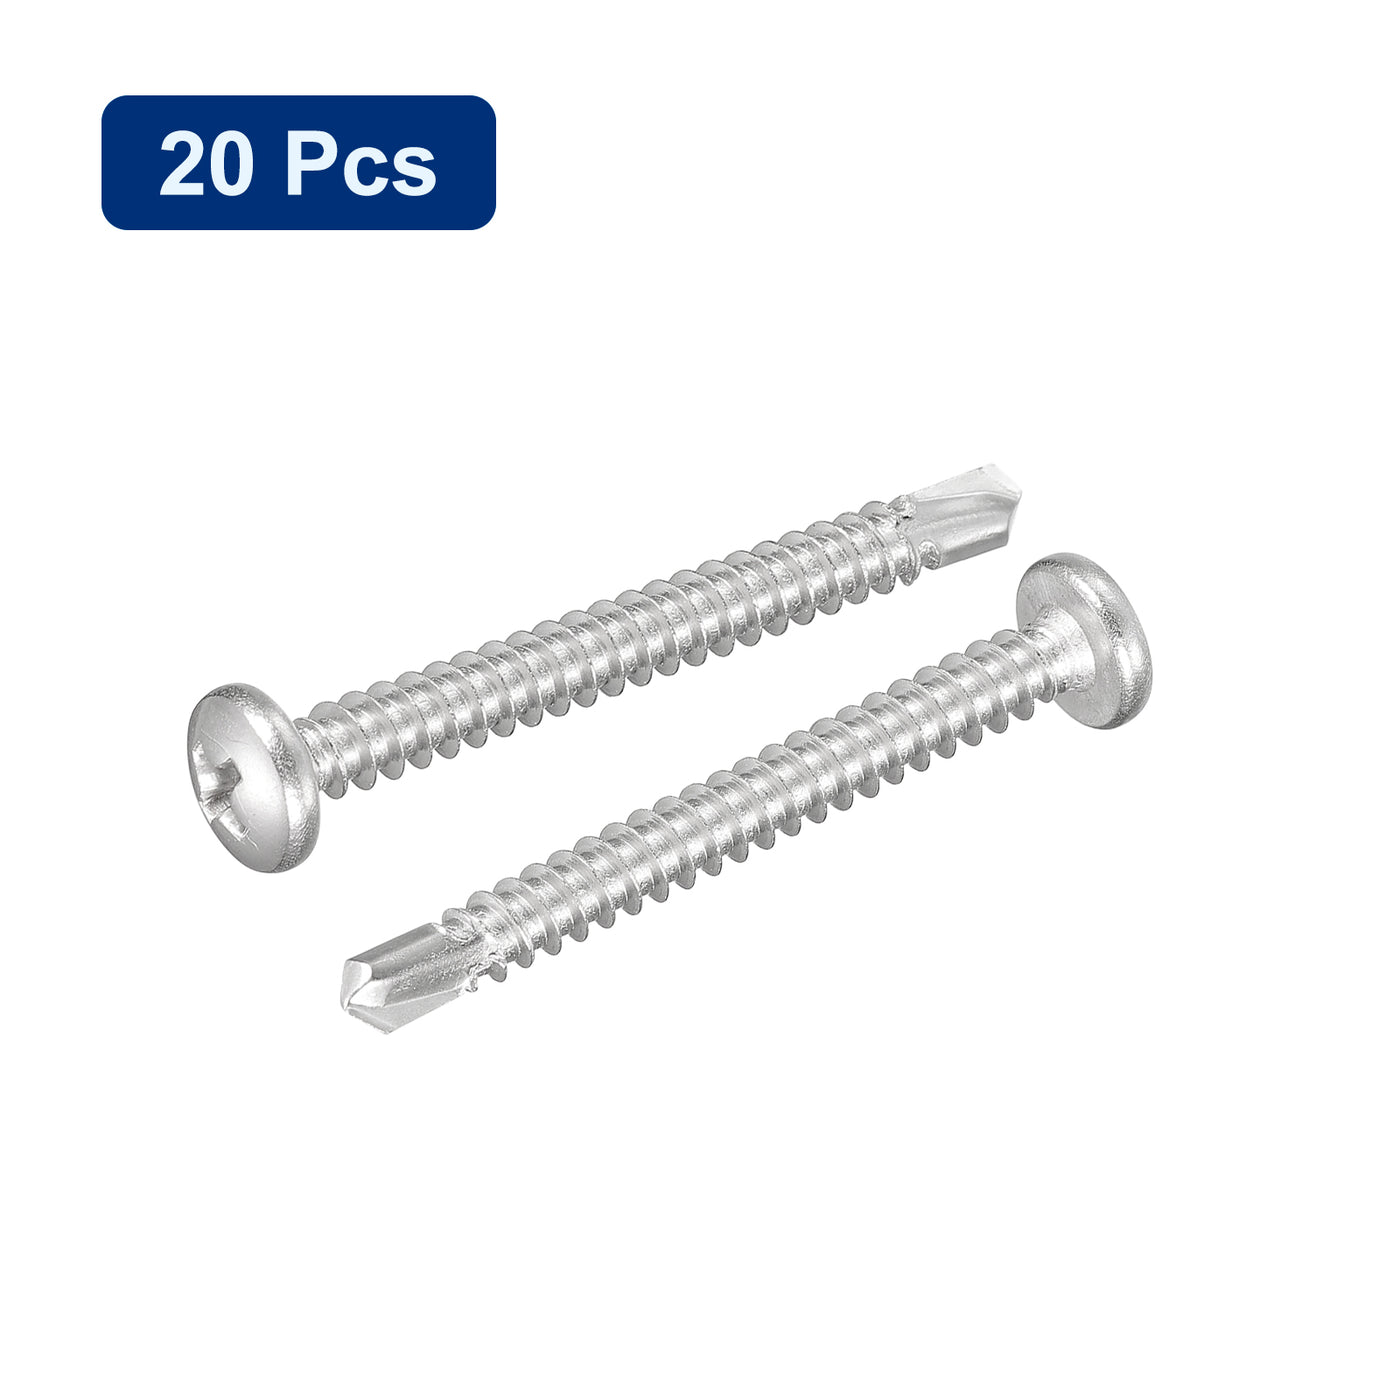 uxcell Uxcell #10 x 1-3/4" Self Drilling Screws, 20pcs Phillips Pan Head Self Tapping Screws